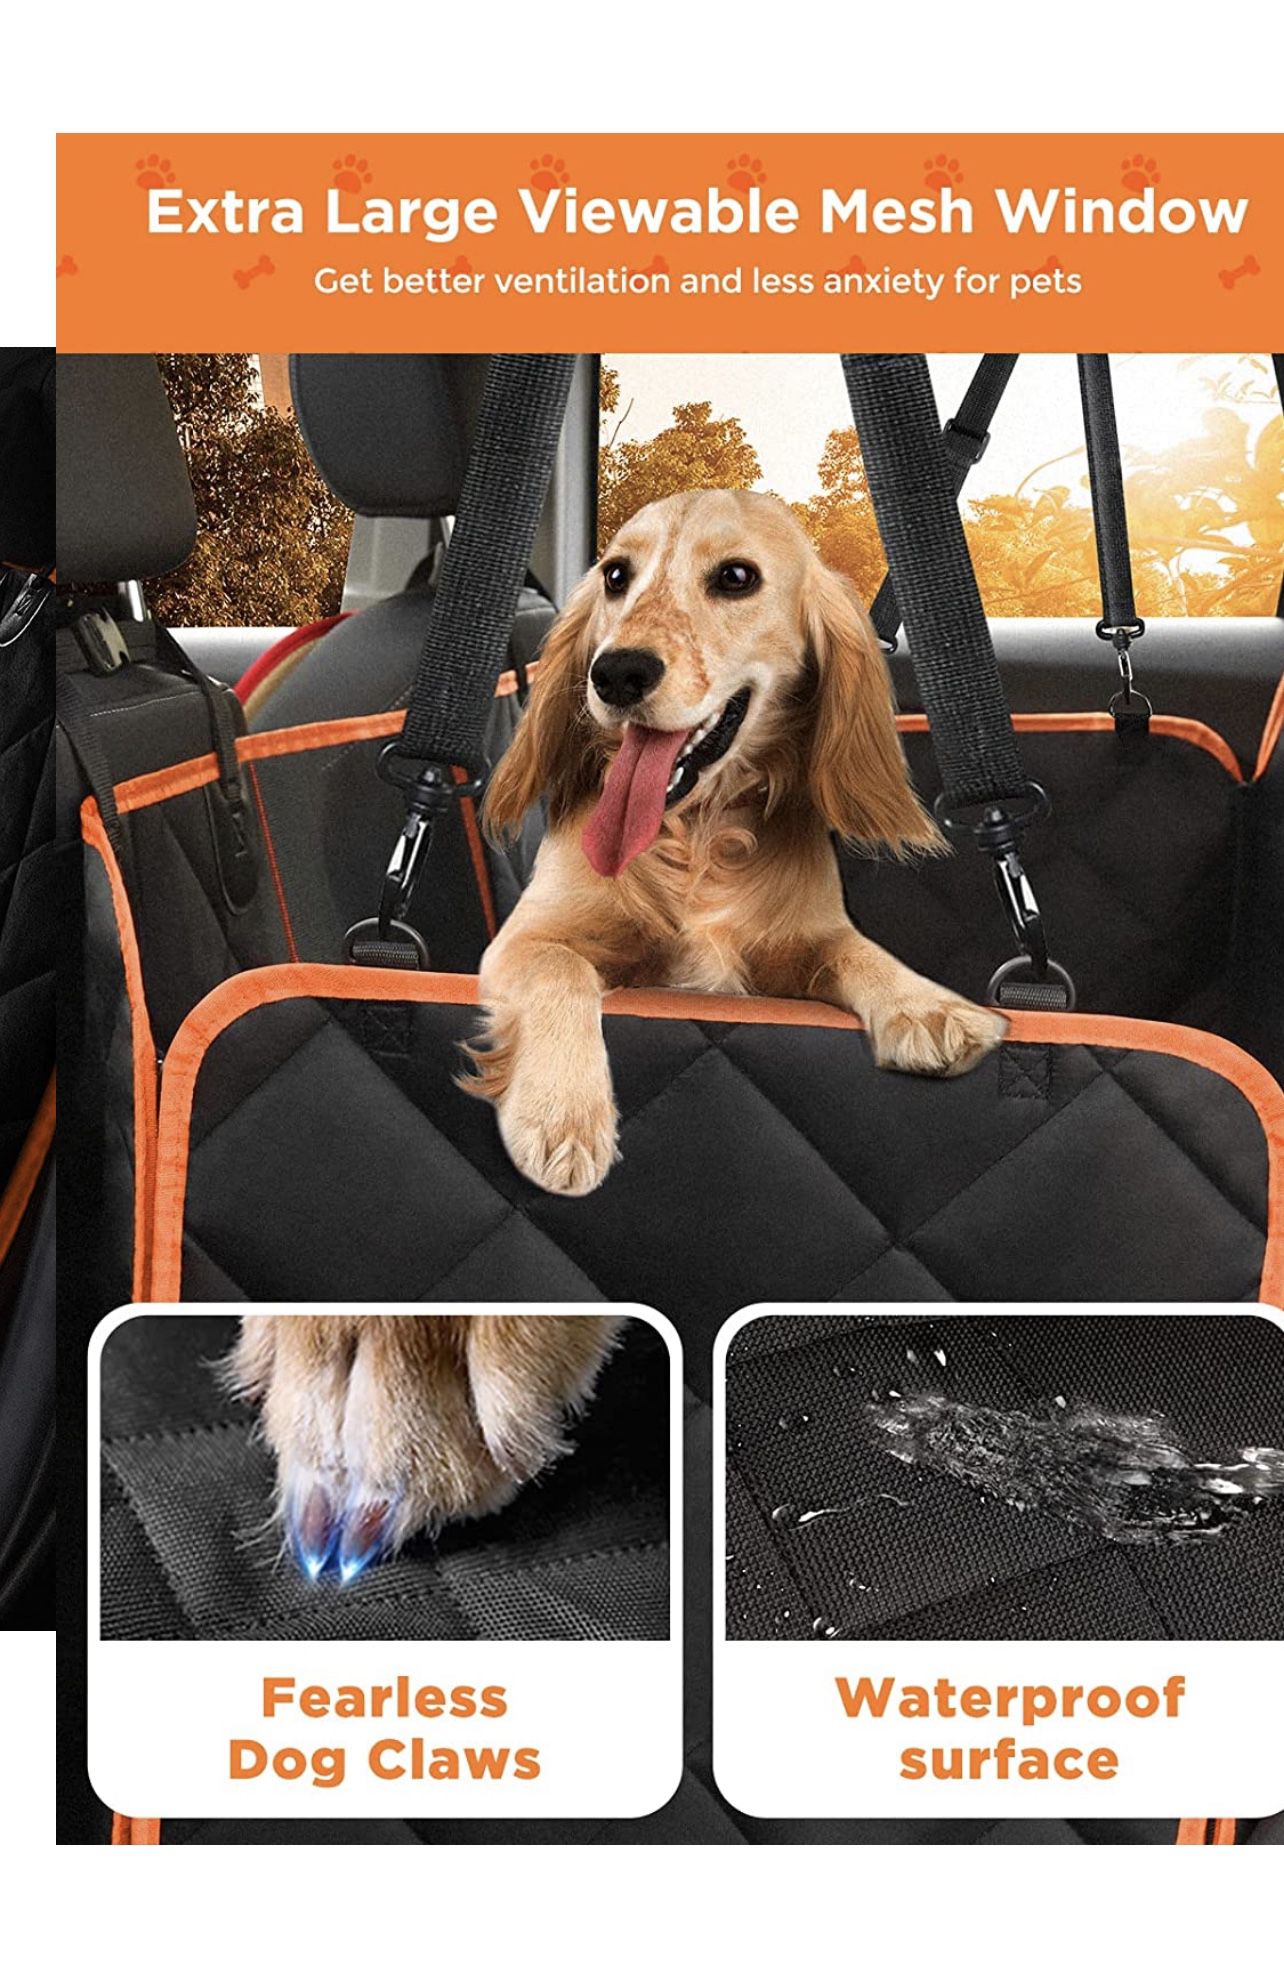 Dog Car Seat Cover,Scratchproof Waterproof Collapsible Dog Car Seat Covers,Car Seat Protector for Dogs with Mesh Window & Storage Pocket, Washable Dog